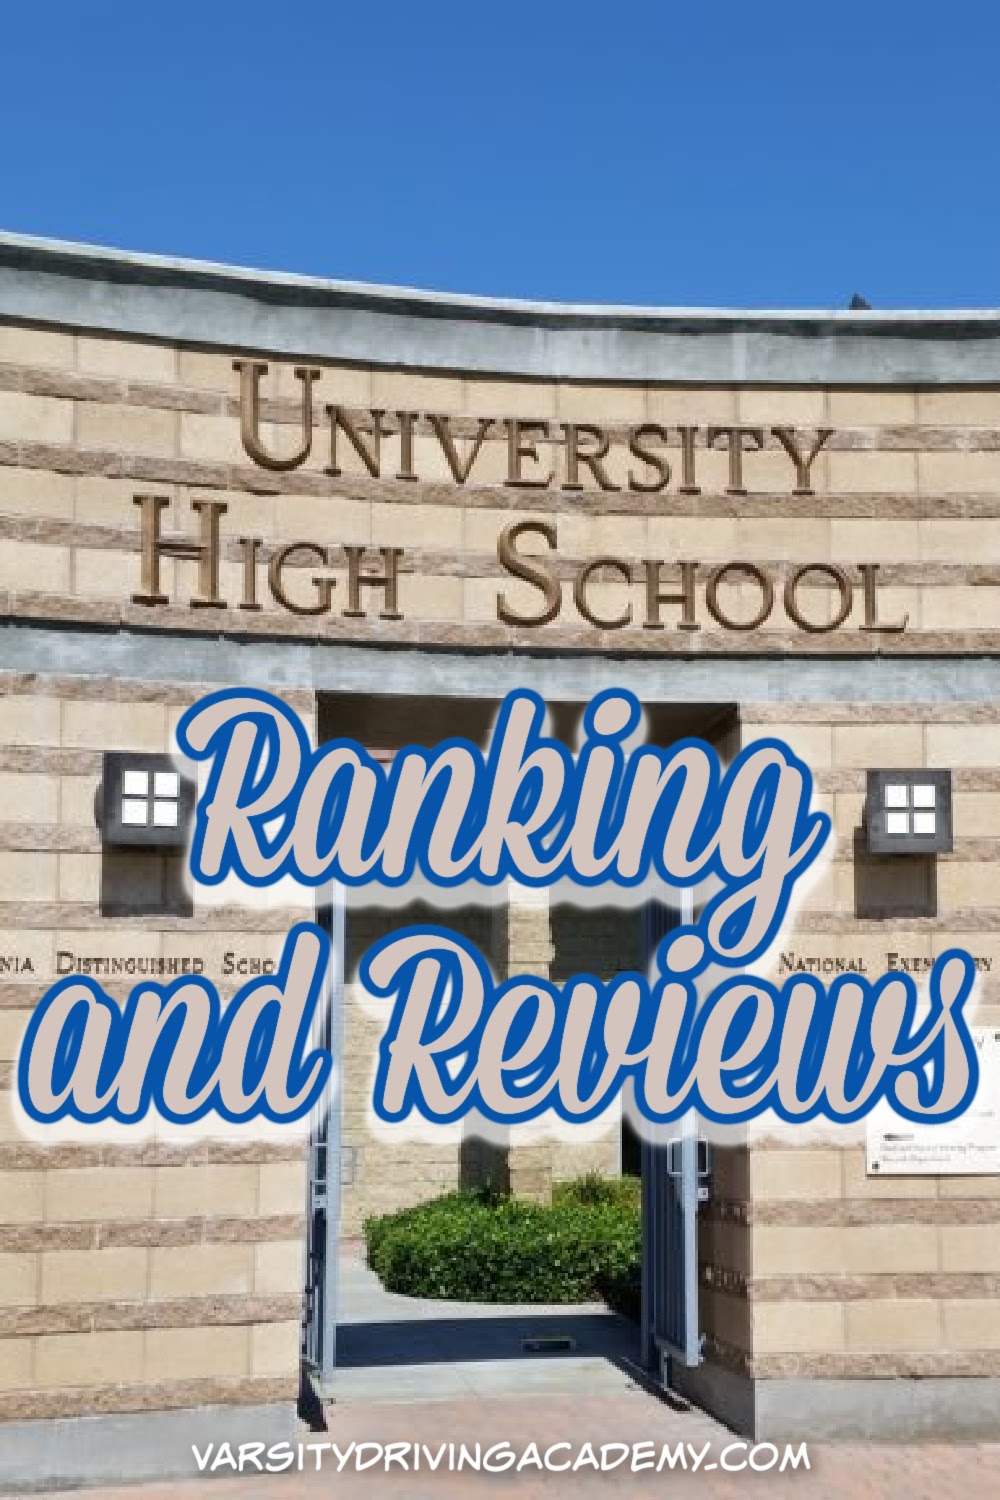 Great Schools ranks and reviews schools all over the country, and University High School is among the top rated in the country.